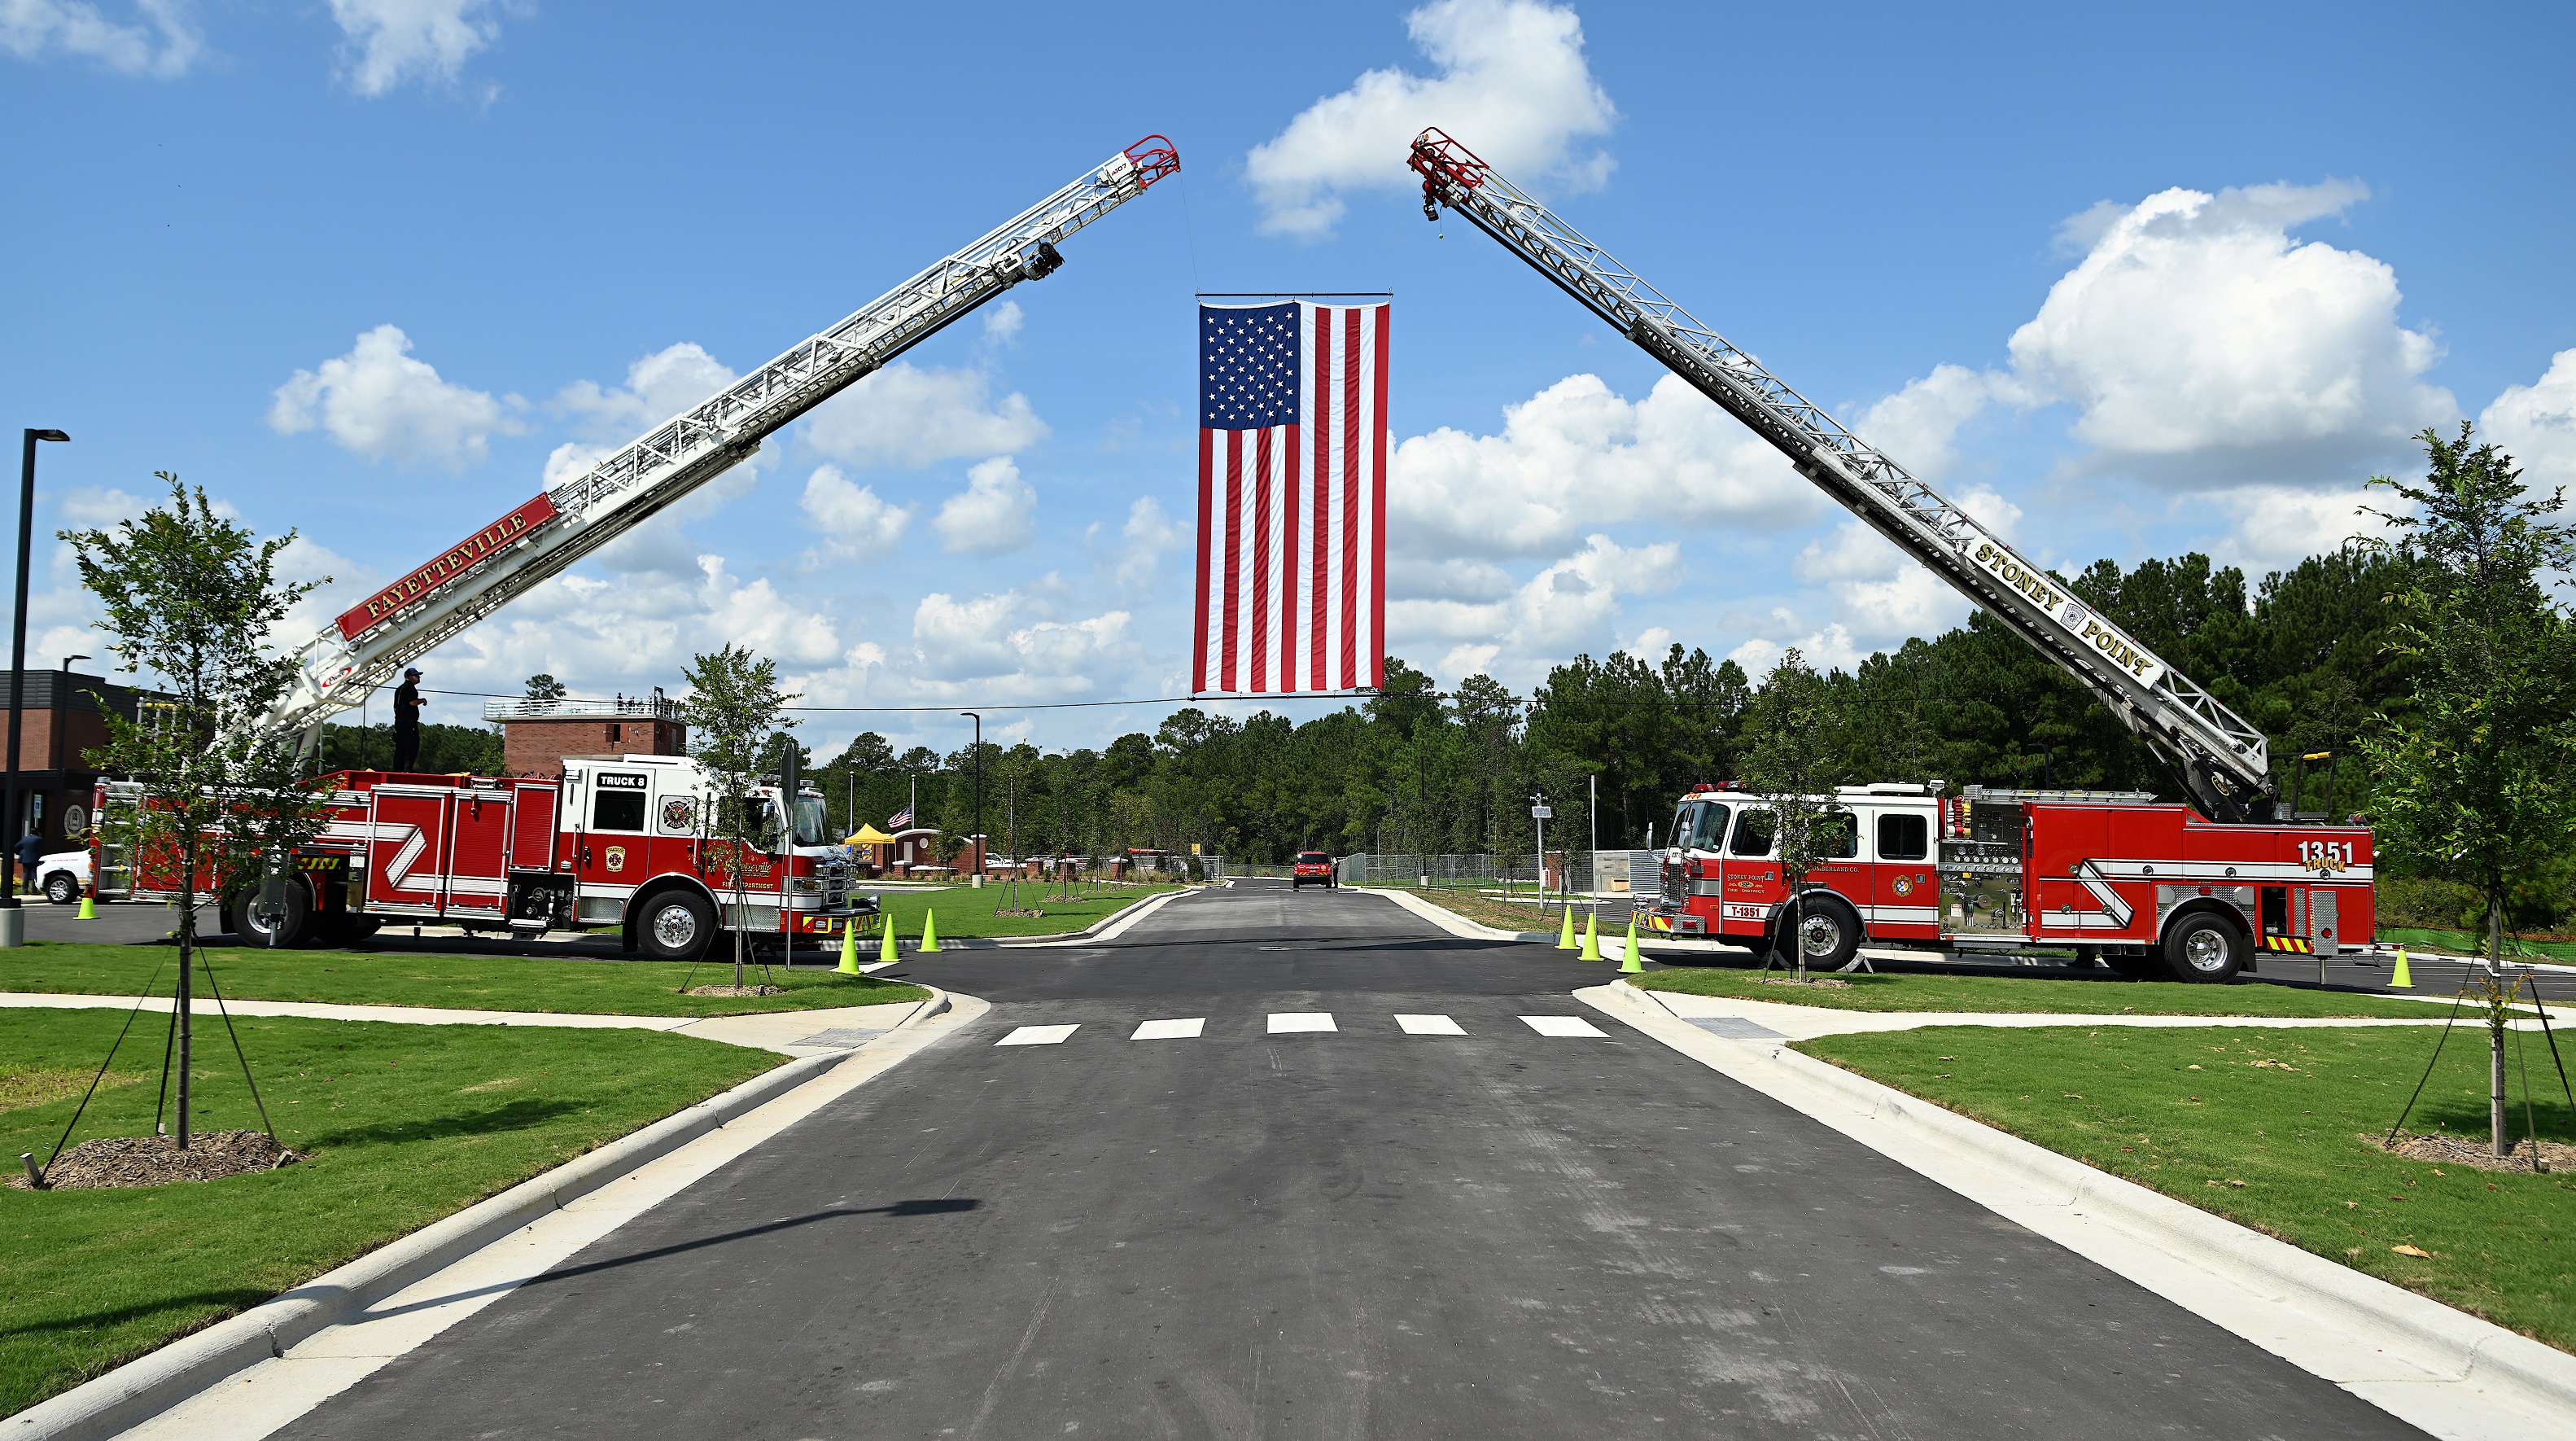 A United States flag hangs between two fire truck ladders extended off of trucks.